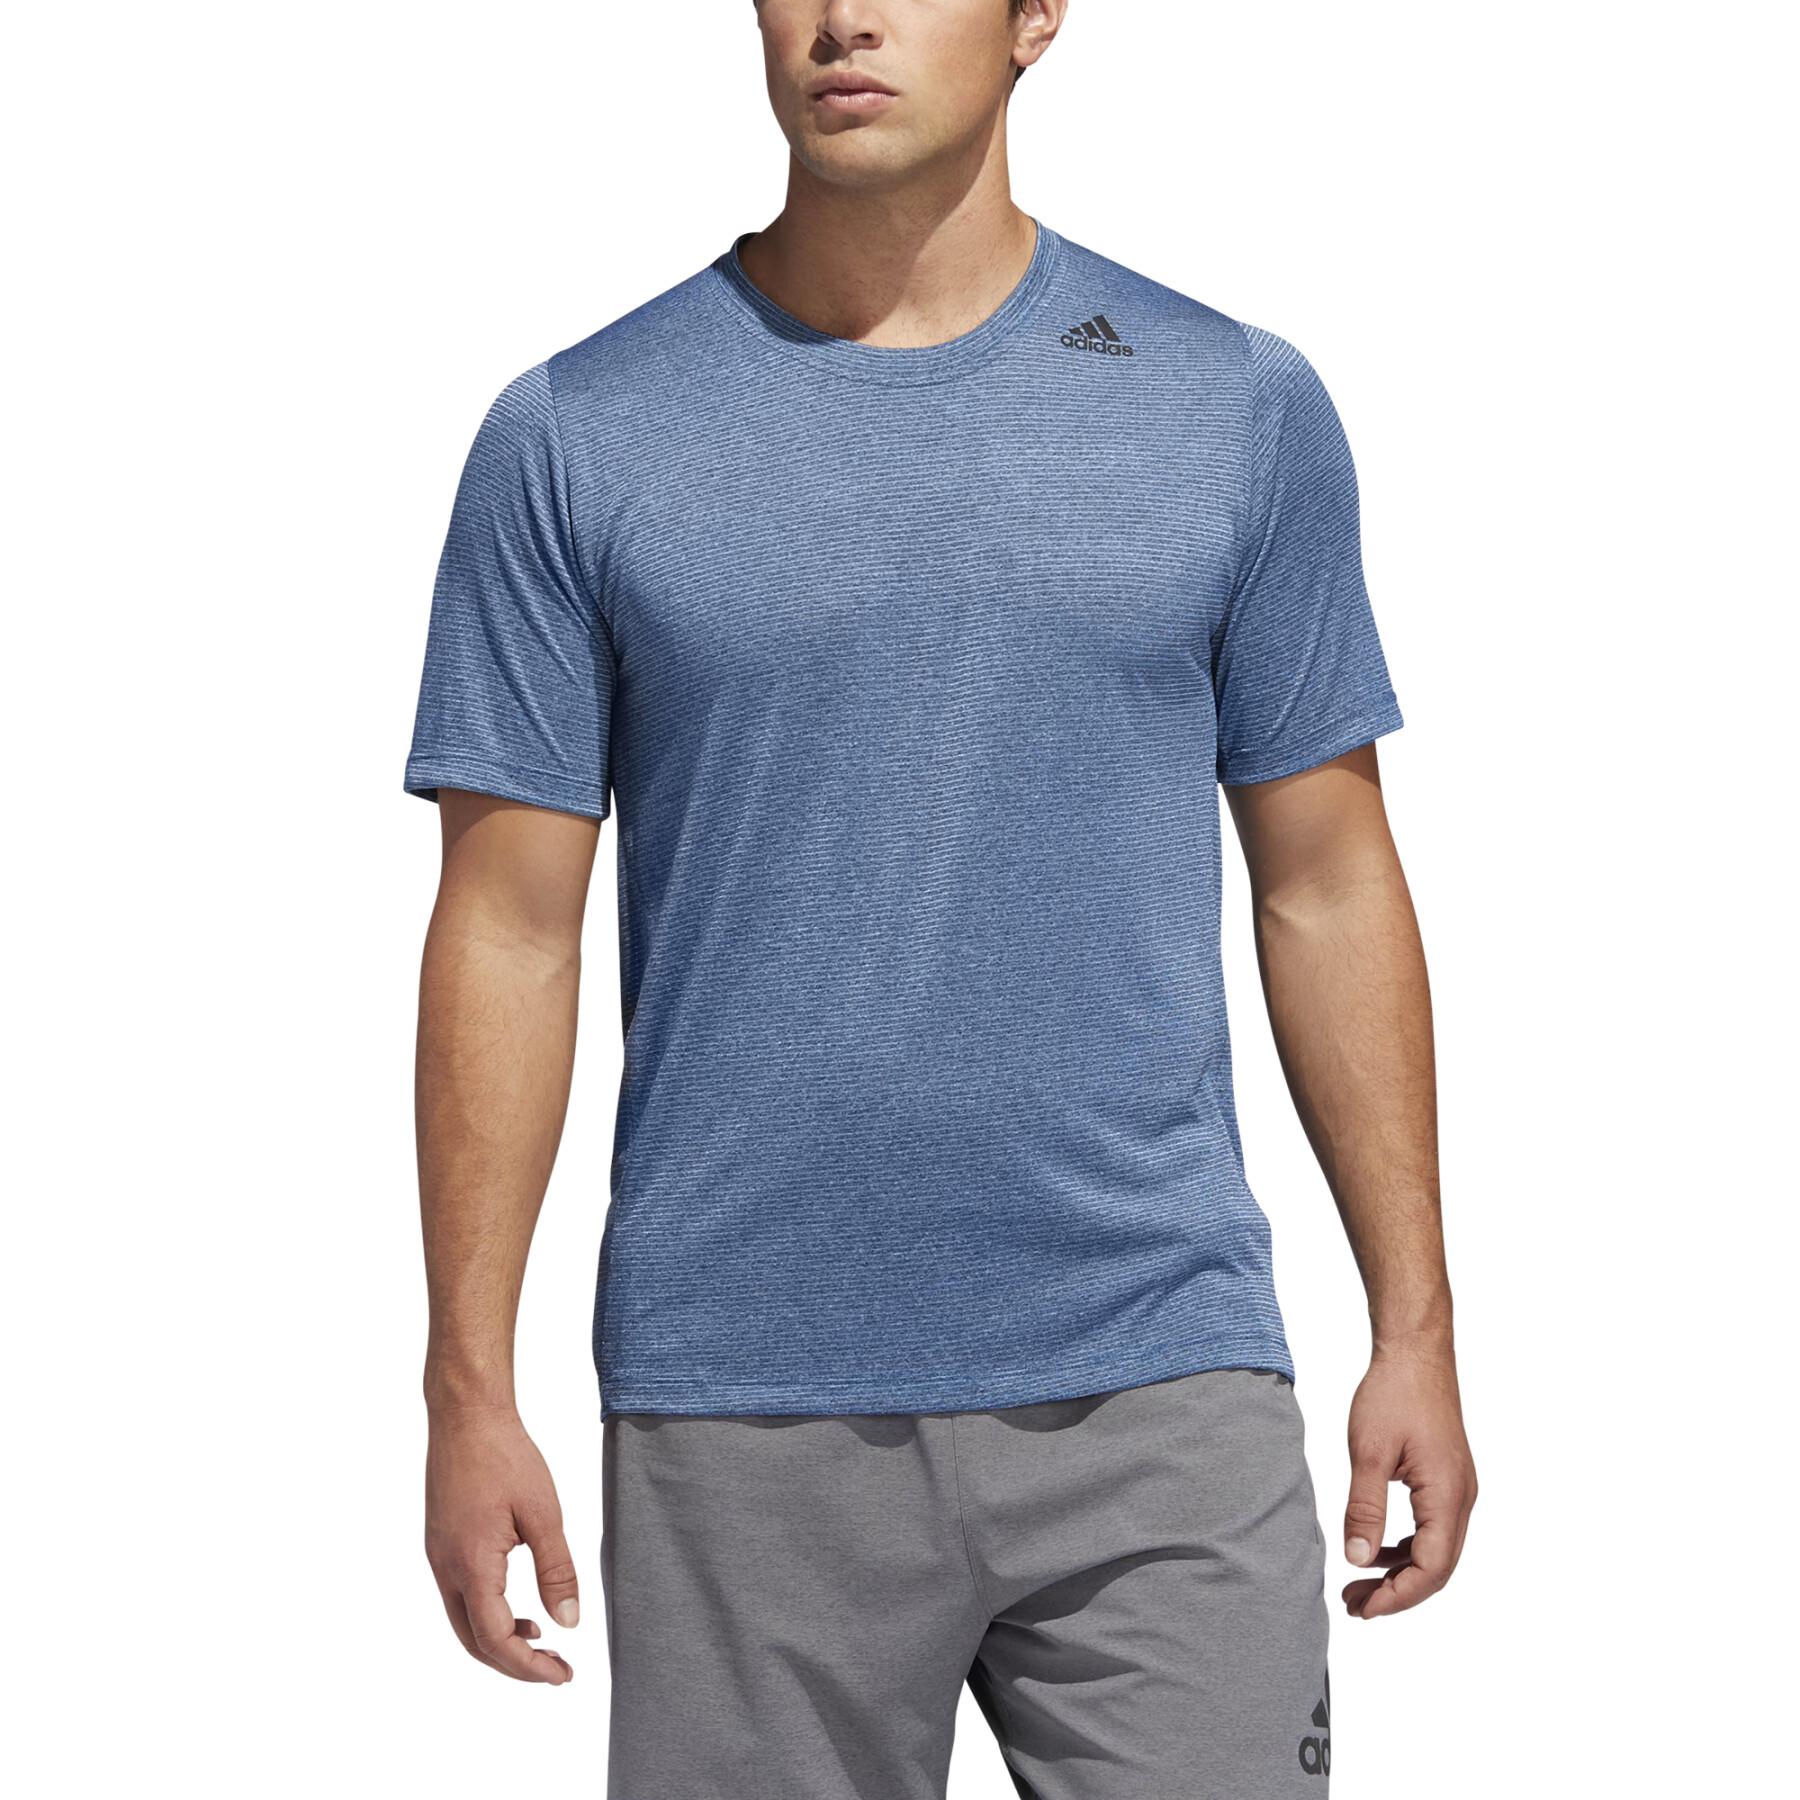 T-shirt adidas FreeLift Tech Climacool Fitted